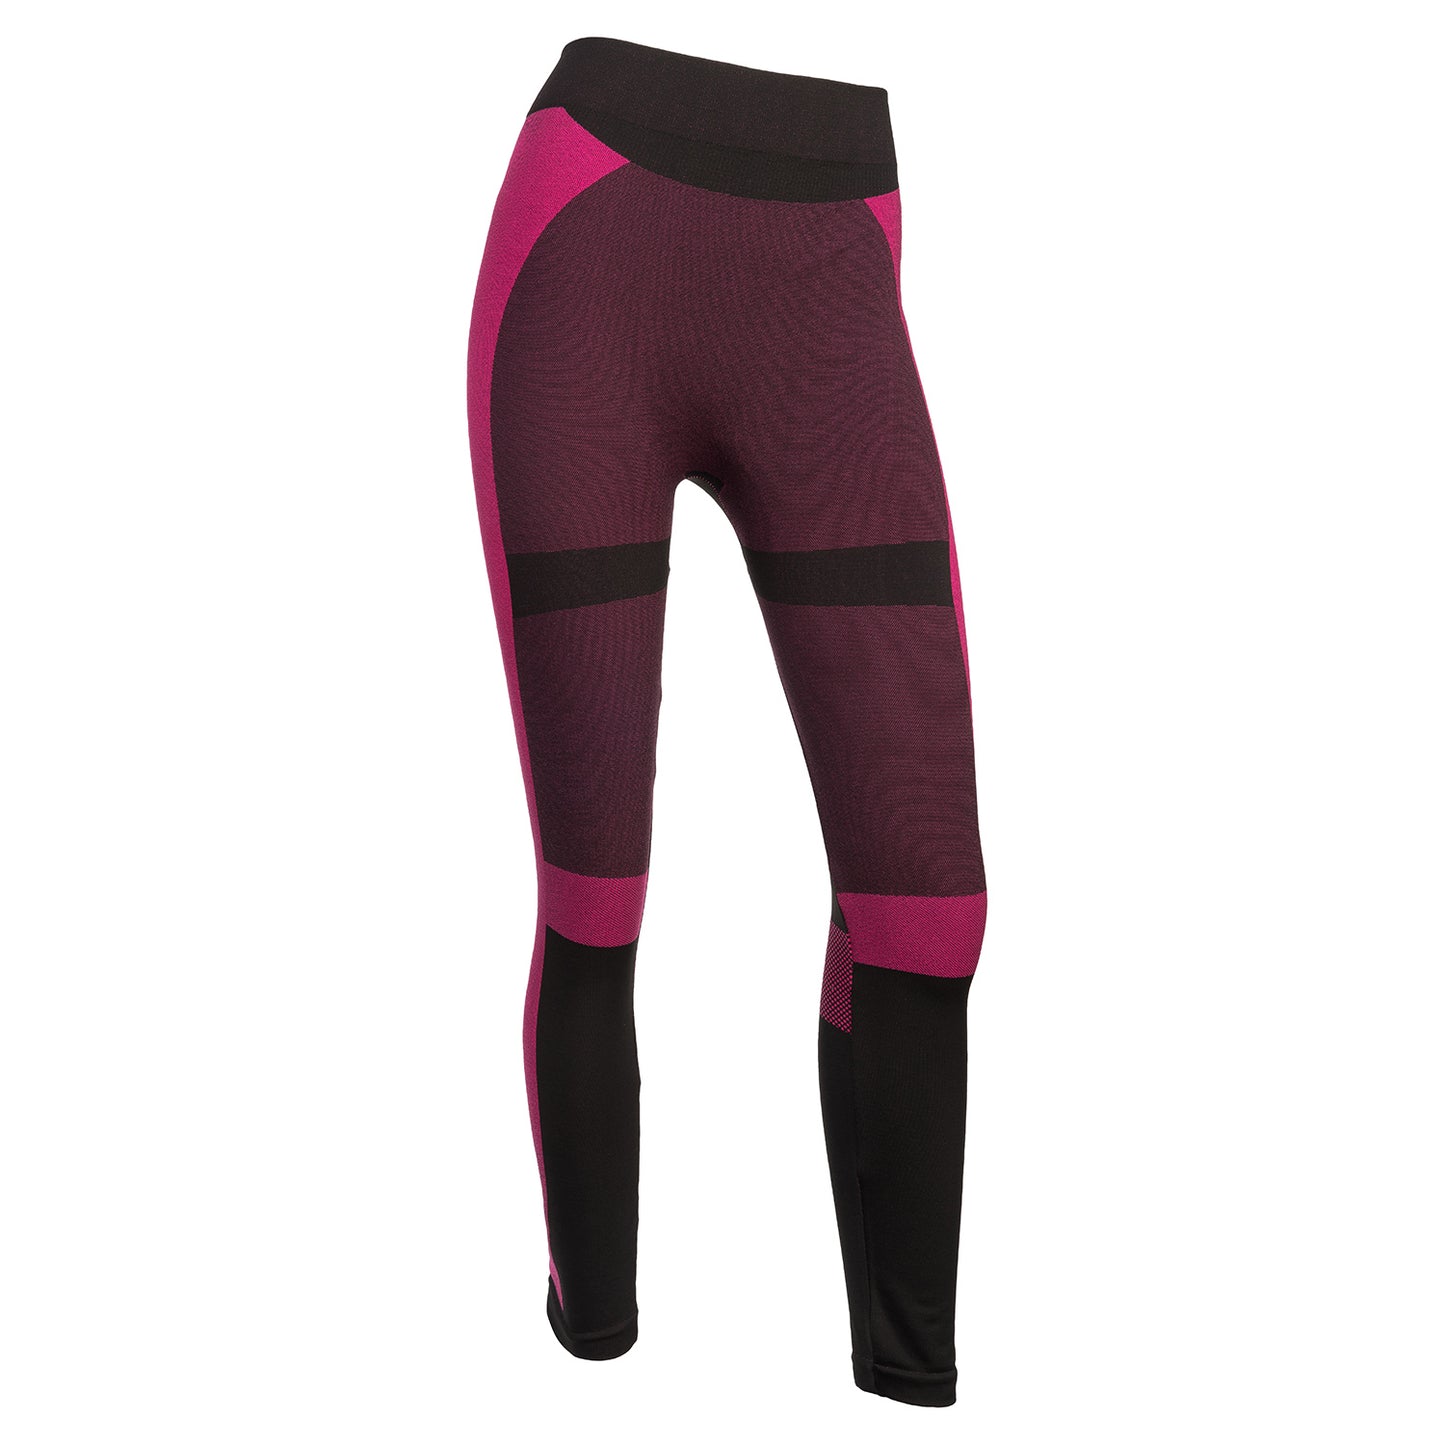 Athleisure High-Waisted Stretchy Workout Legging